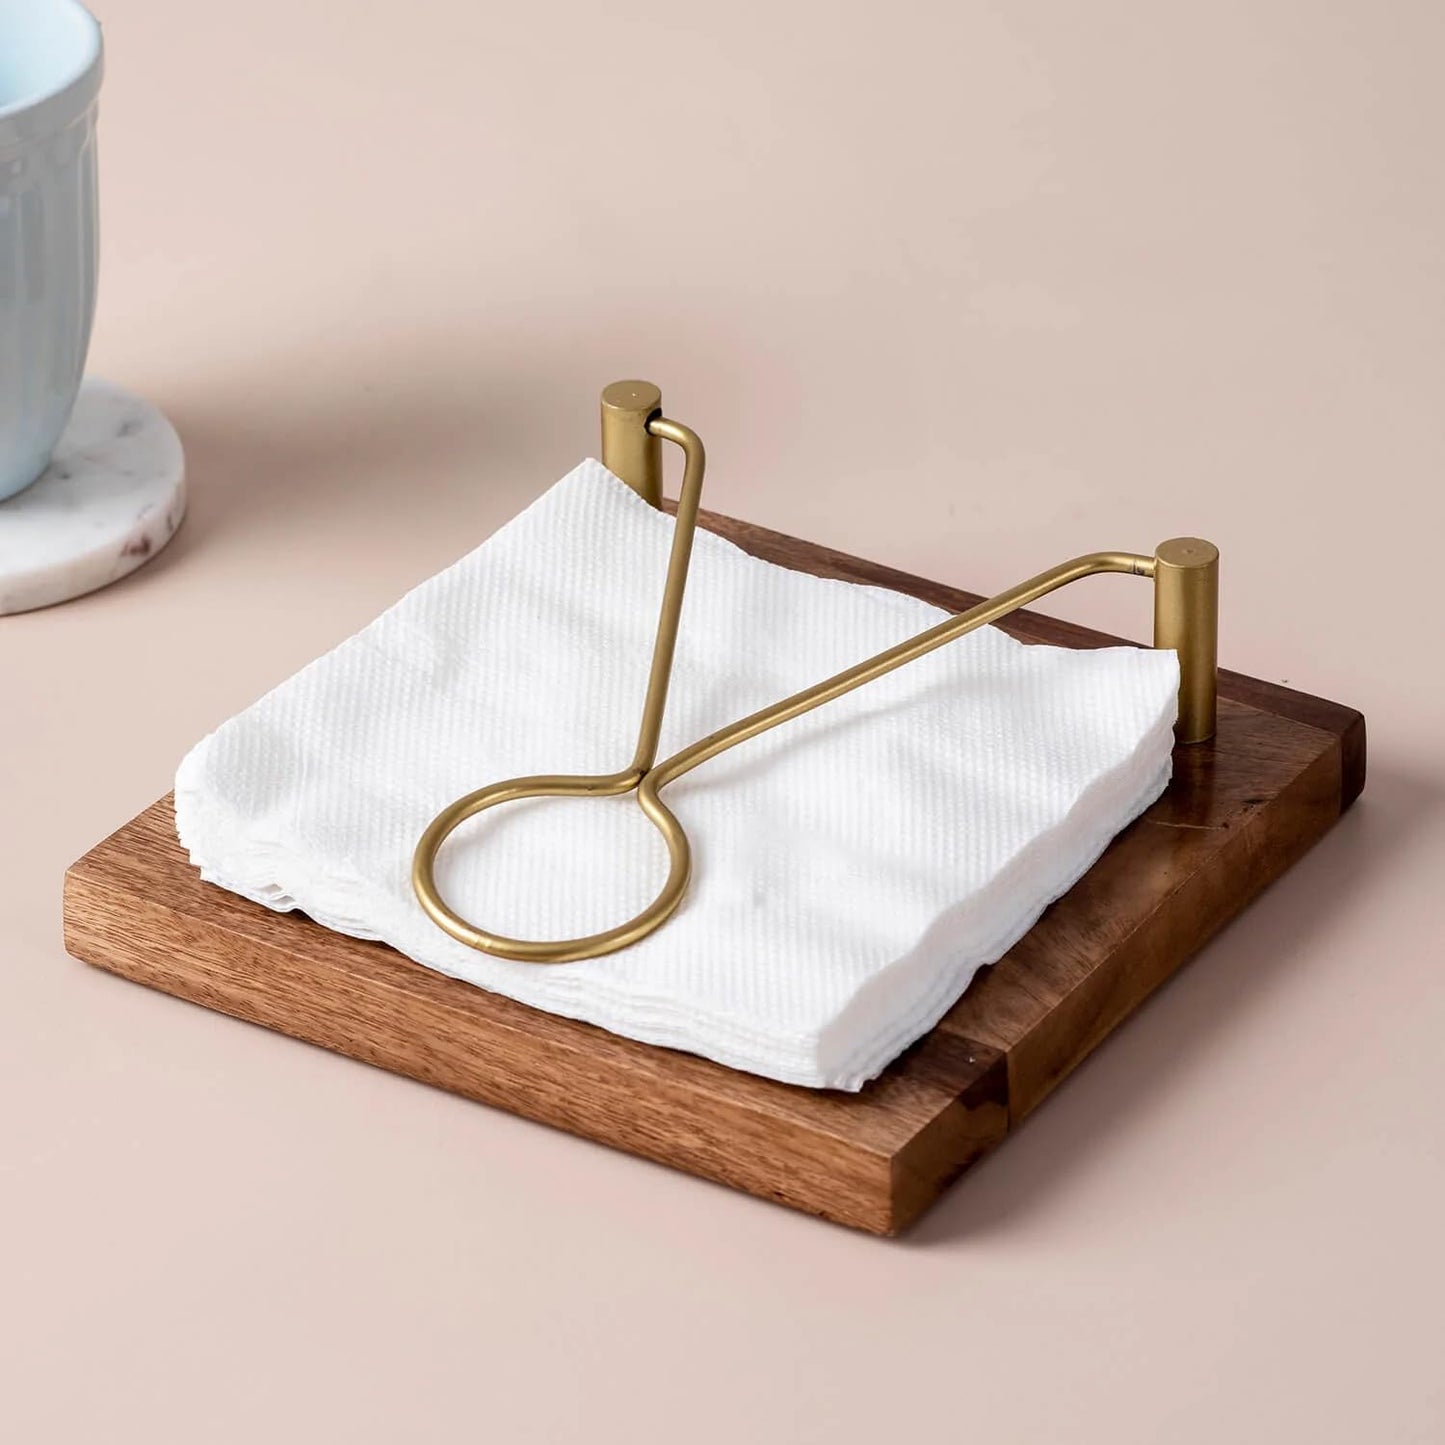 JISCOVERY Wooden Tissue Holder - Gold